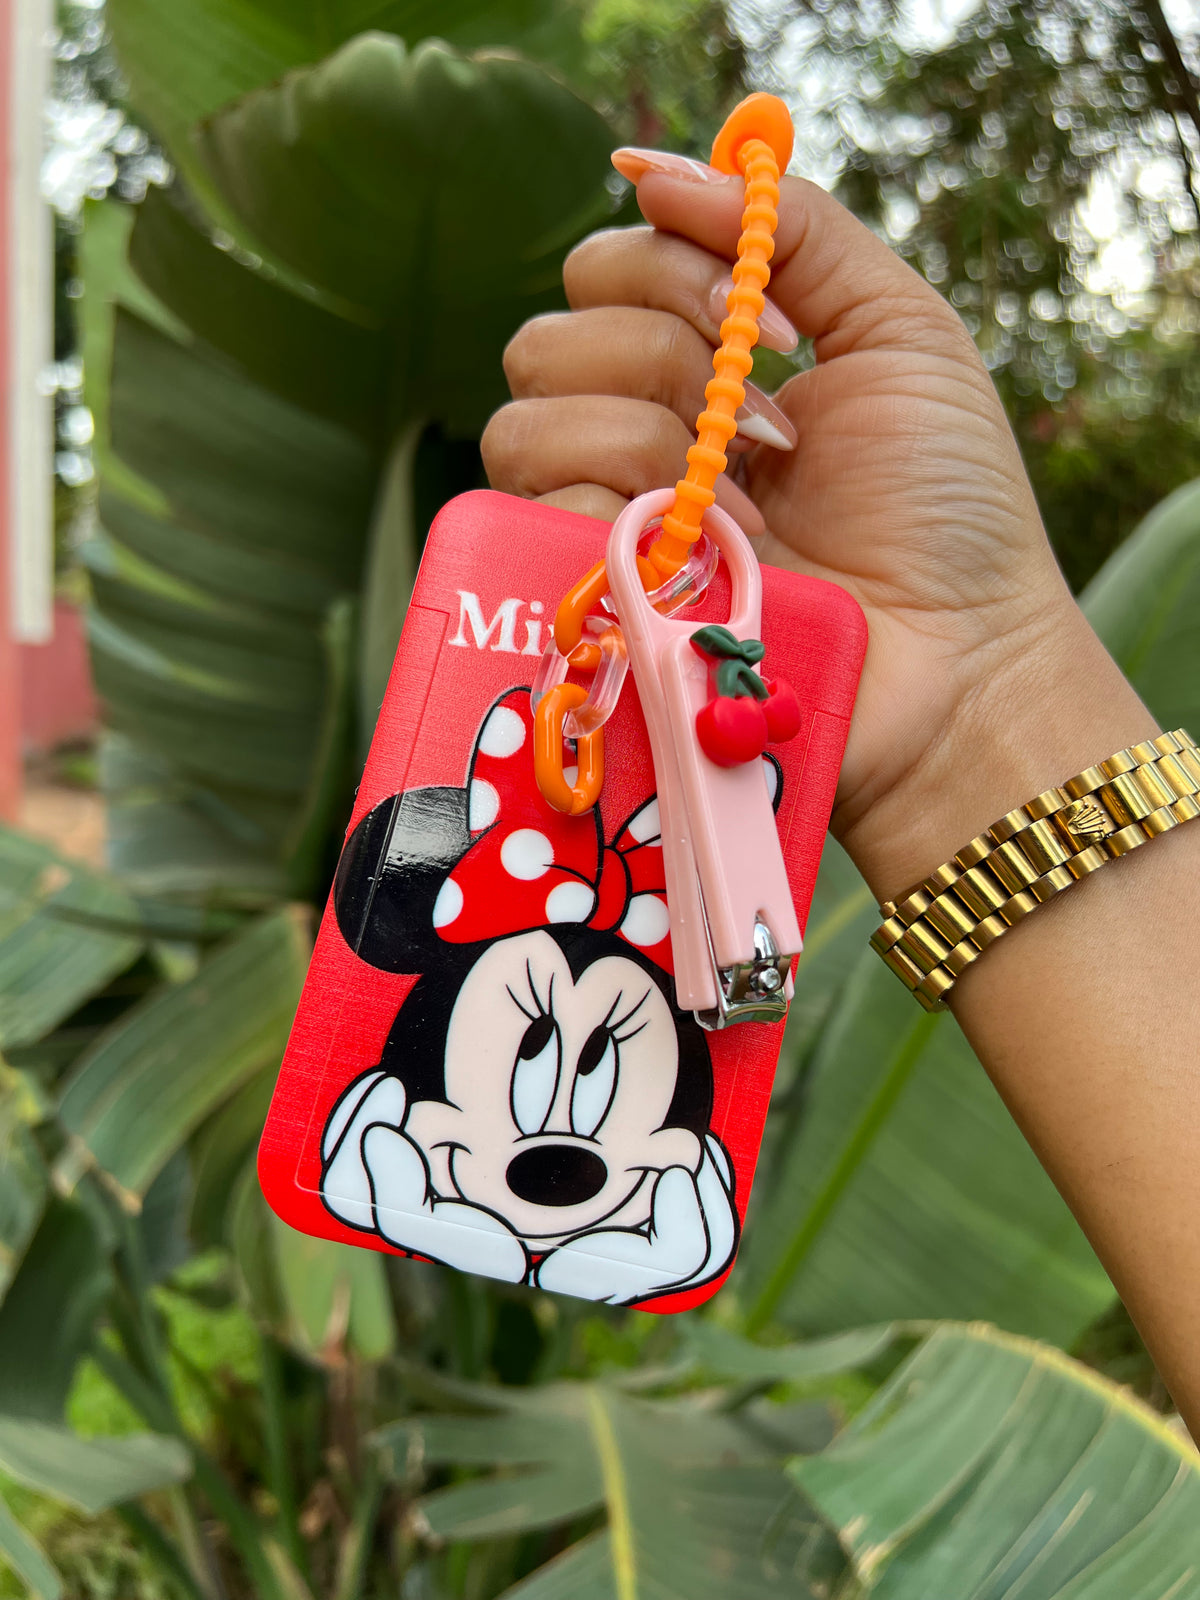 Id card holder keychain, key holder mickie mouse nail cutter